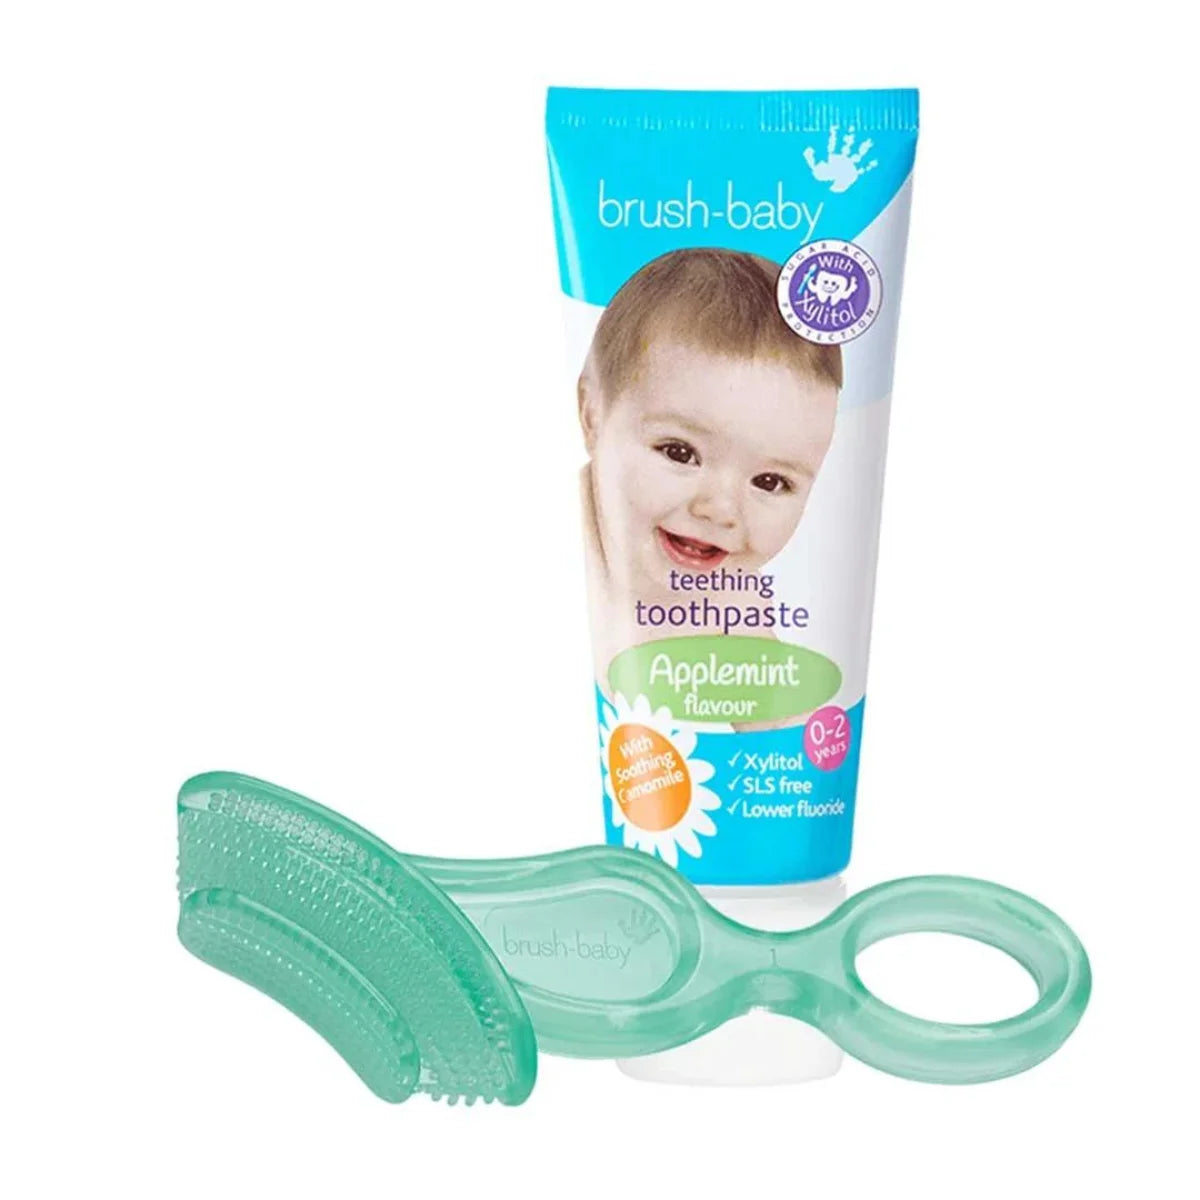 BrushBaby Chewable baby first toothbrush and teething baby toothpaste set